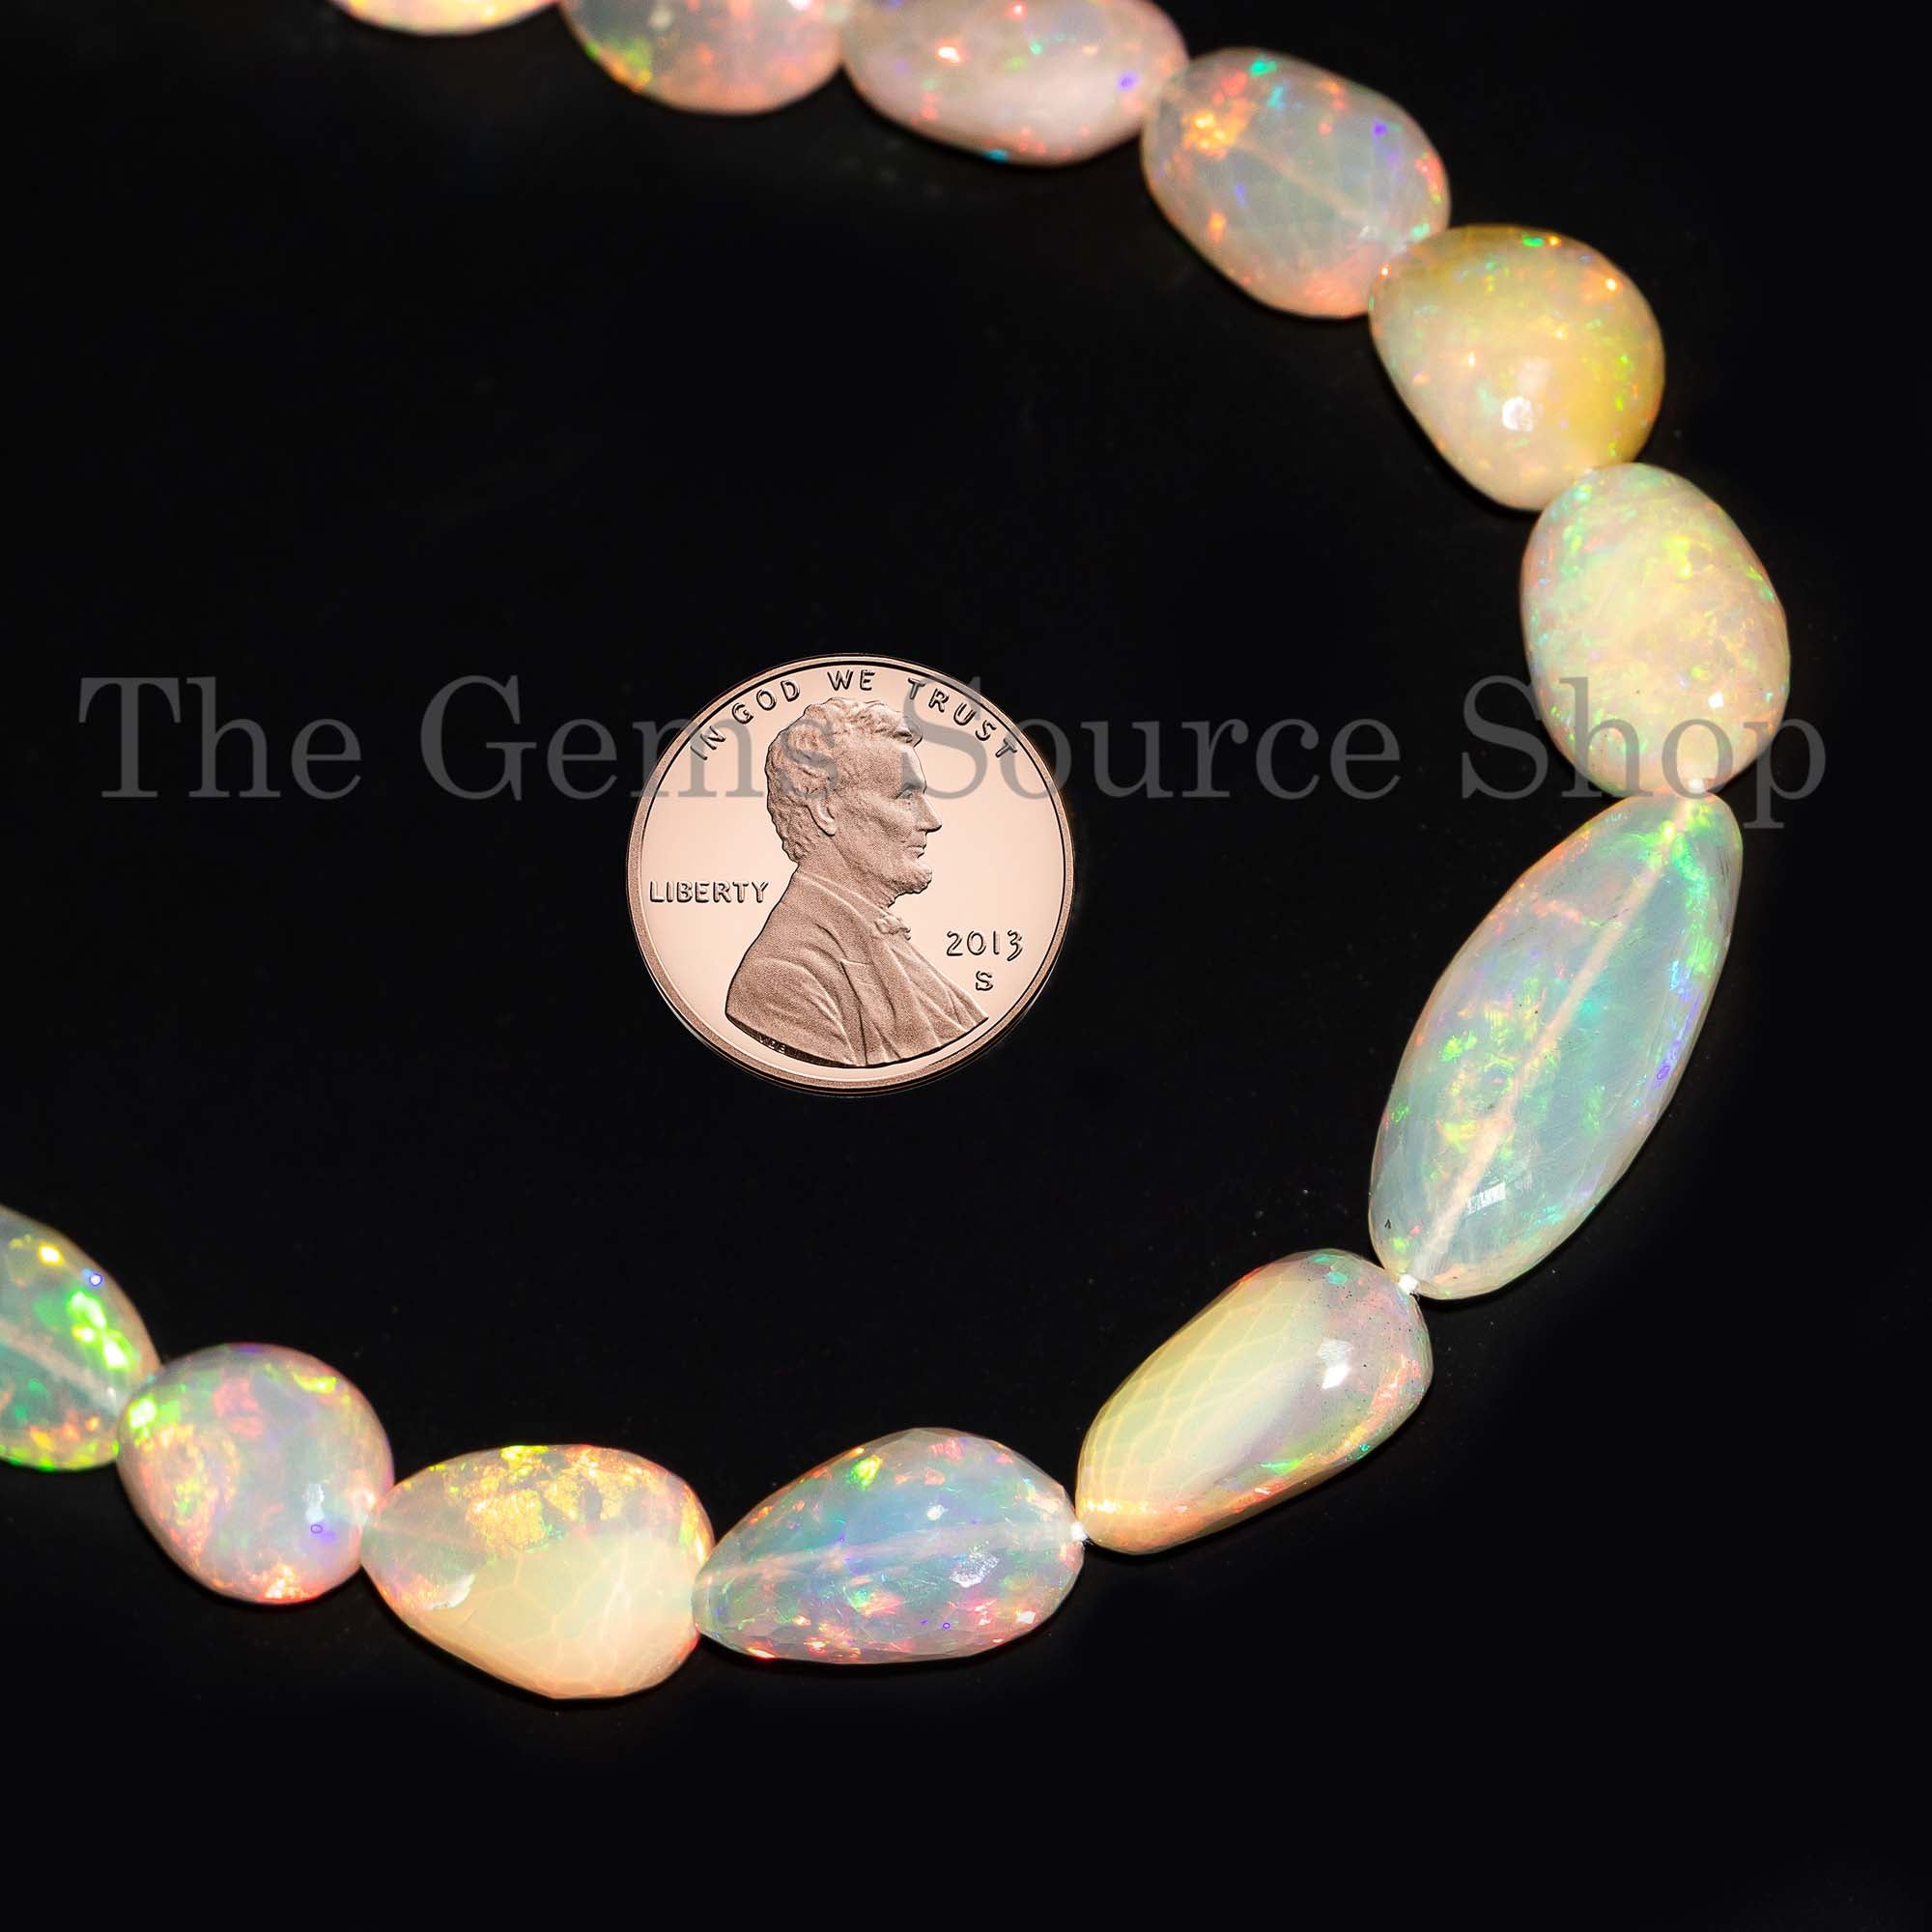 8x10.5-11x23mm Natural Ethiopian Opal Necklace, Top Quality Opal Beads, Faceted Fire Opal Necklace, Ethiopian Opal Beads, Women Necklace